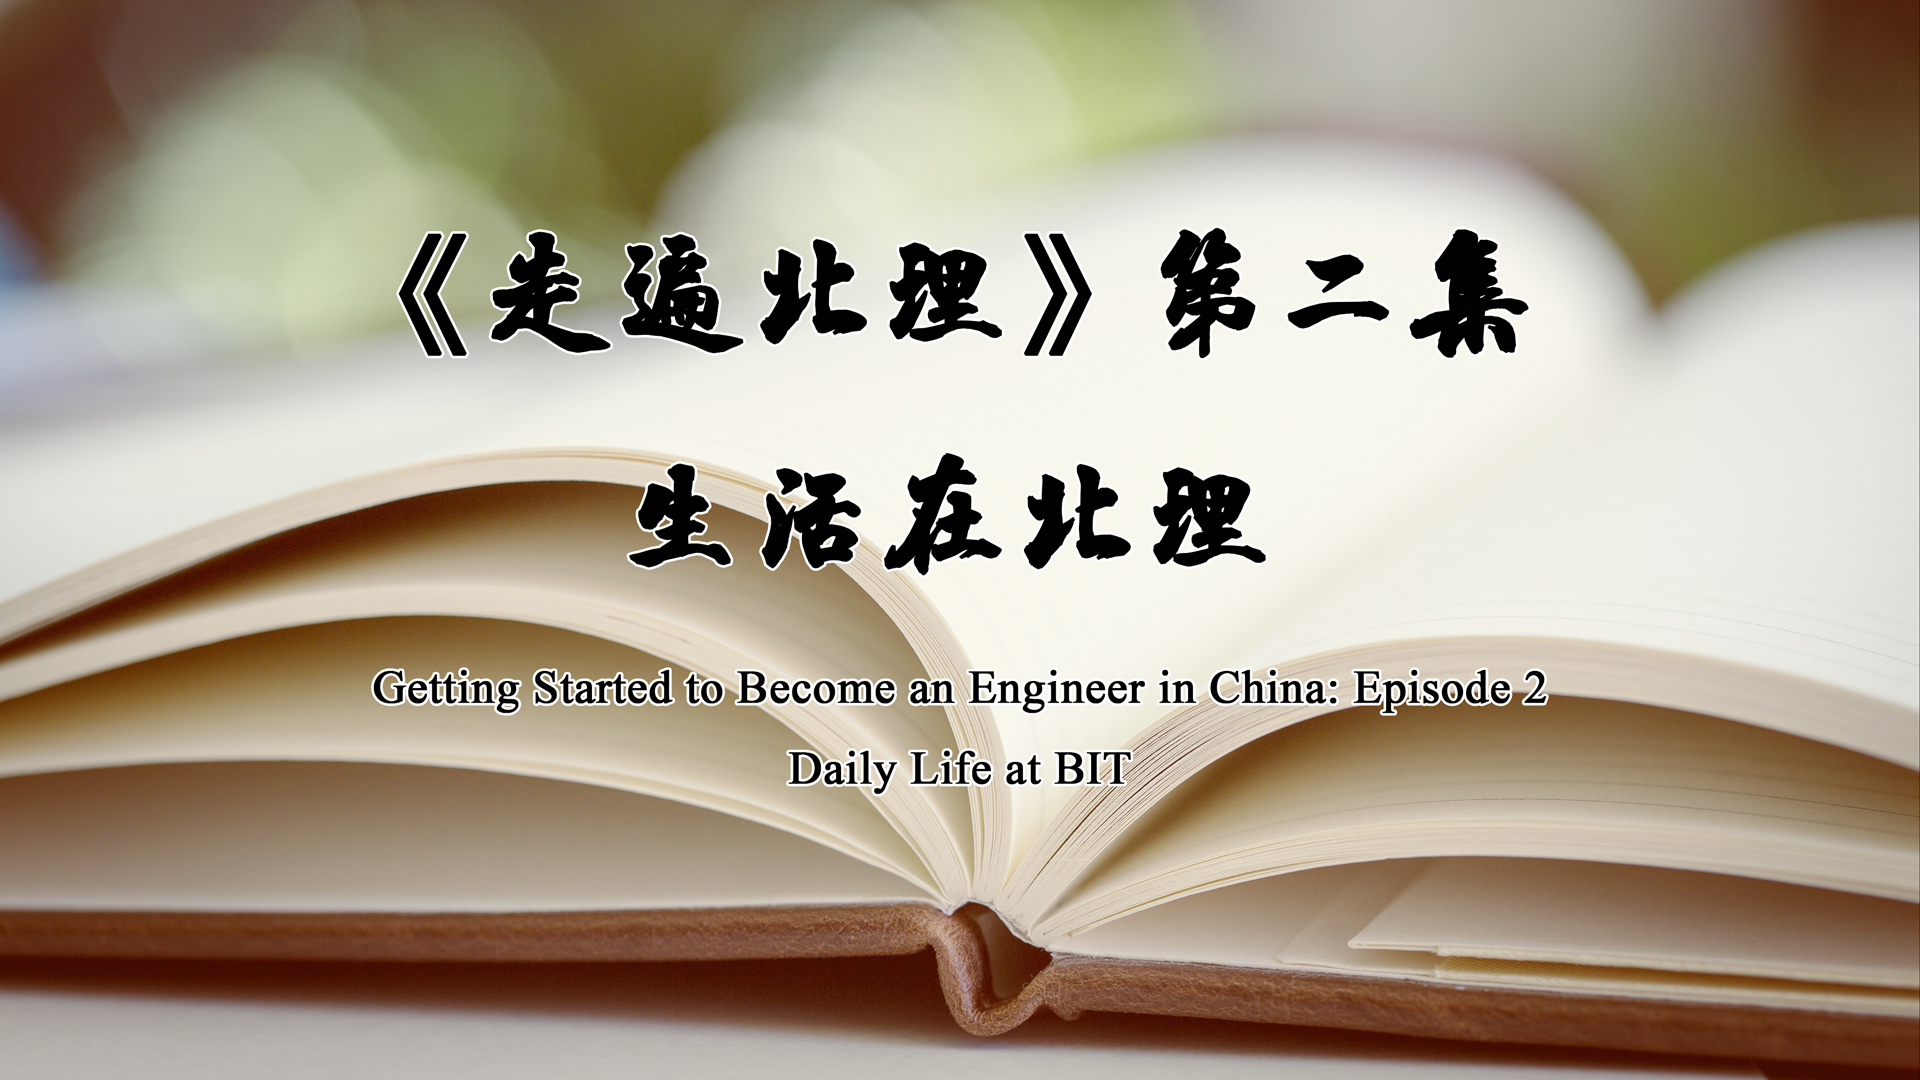 Getting started to become an engineer in China-Episode 2:Daily Life at BIT